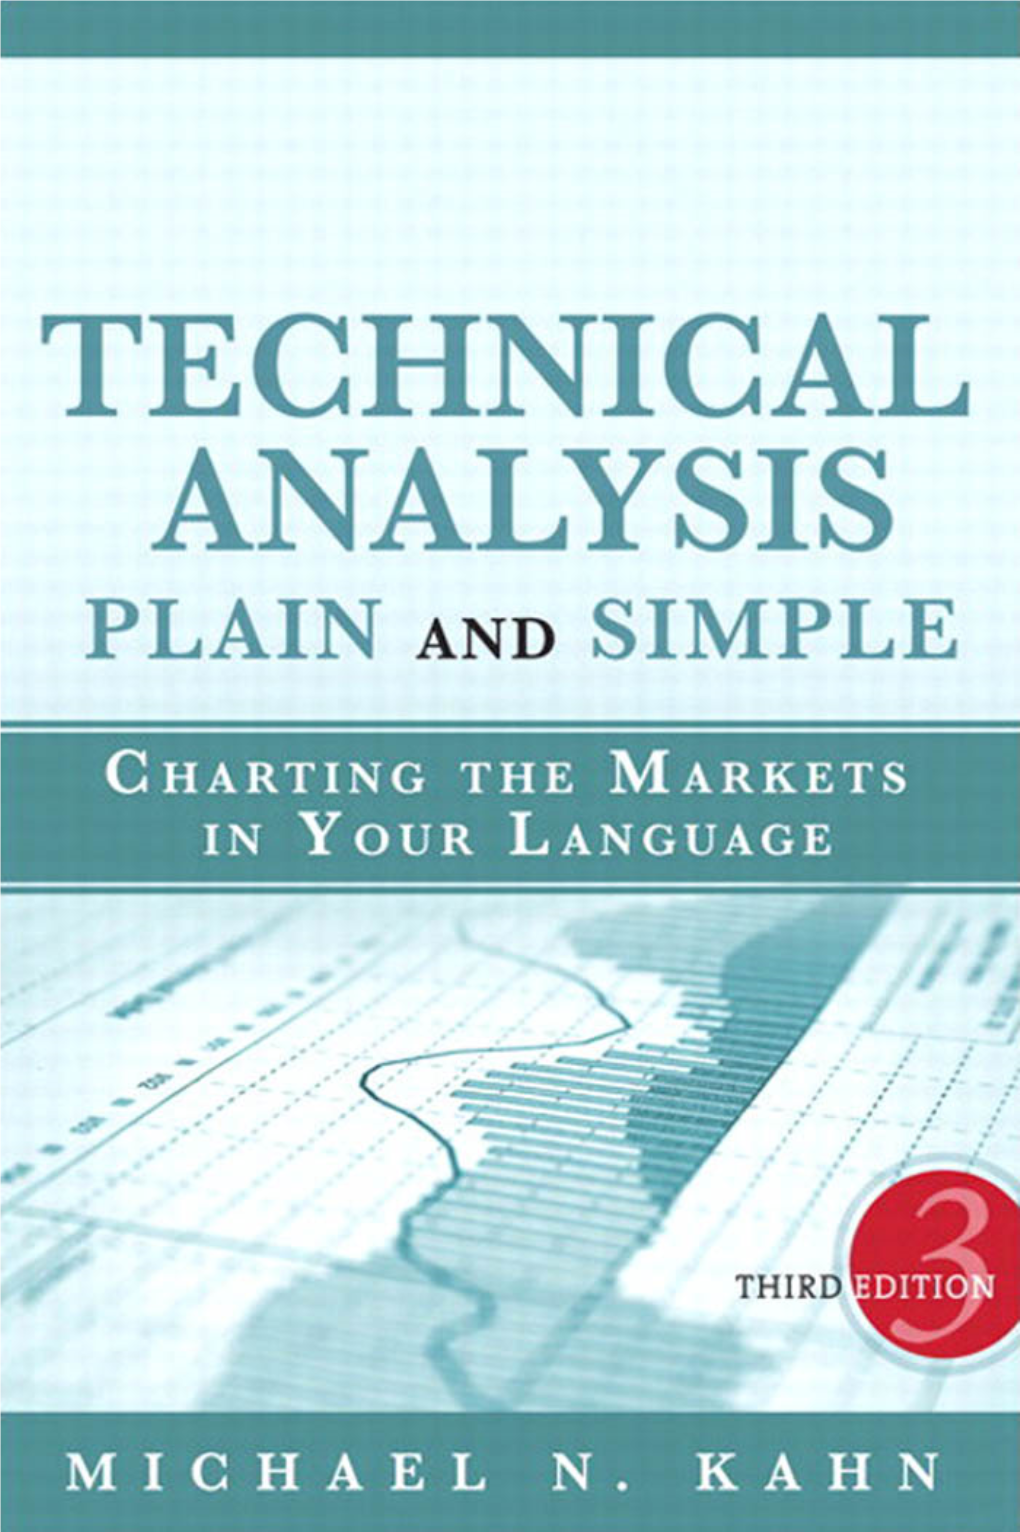 Technical Analysis Plain and Simple, Third Edition Charting the Markets in Your Language